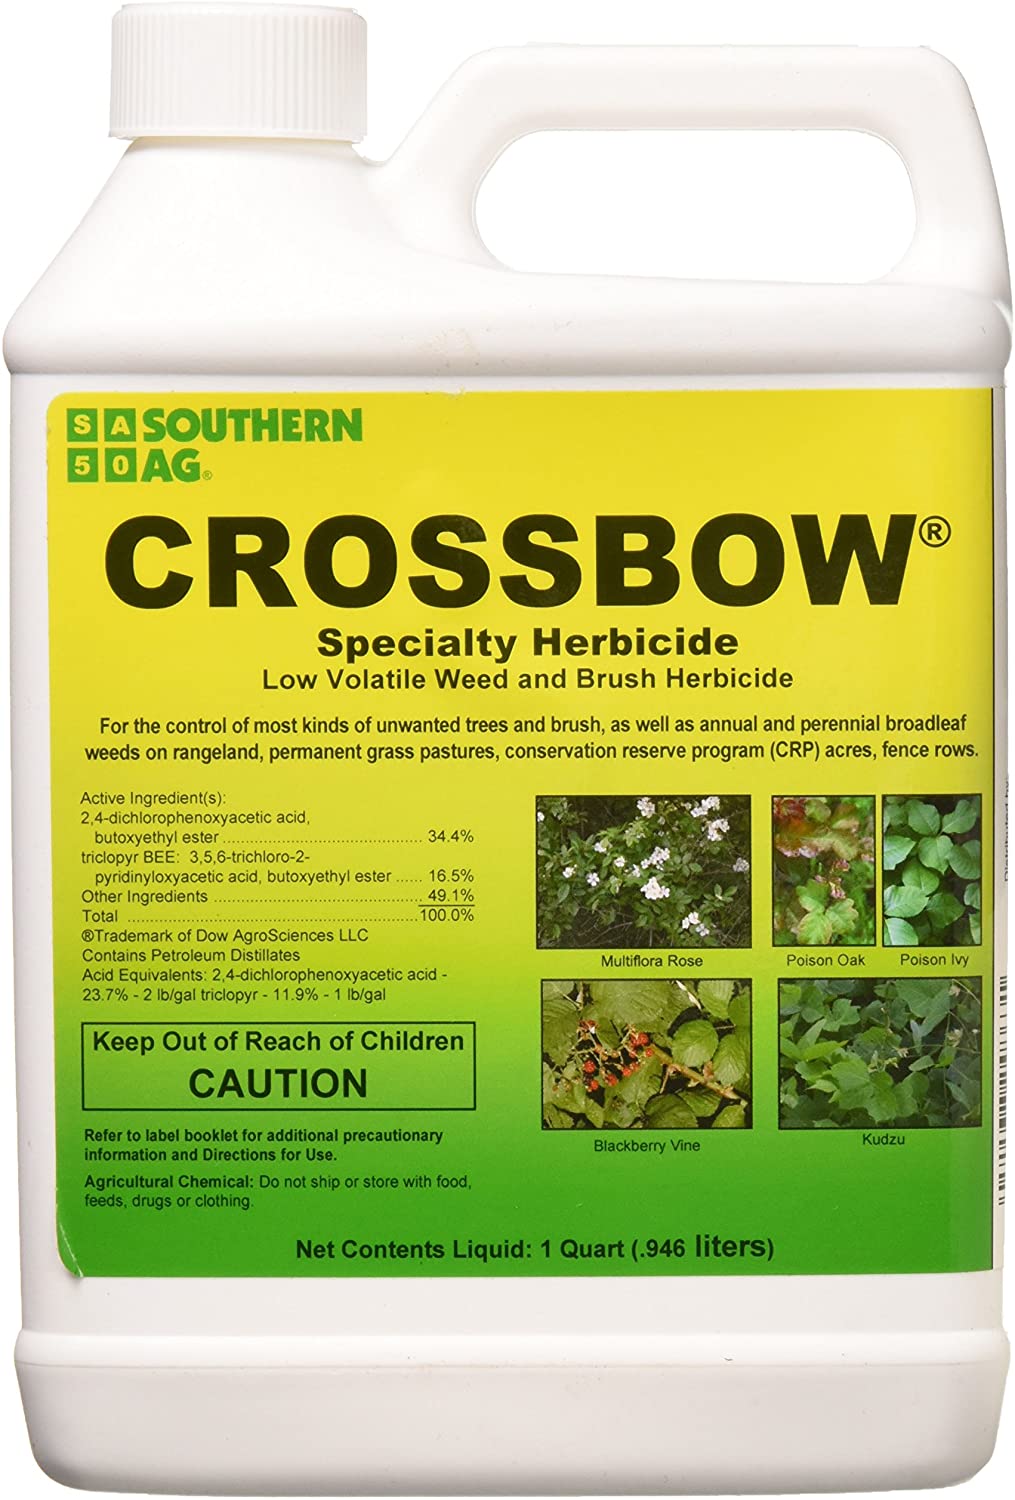  Southern Ag Crossbow Specialty Herbicide